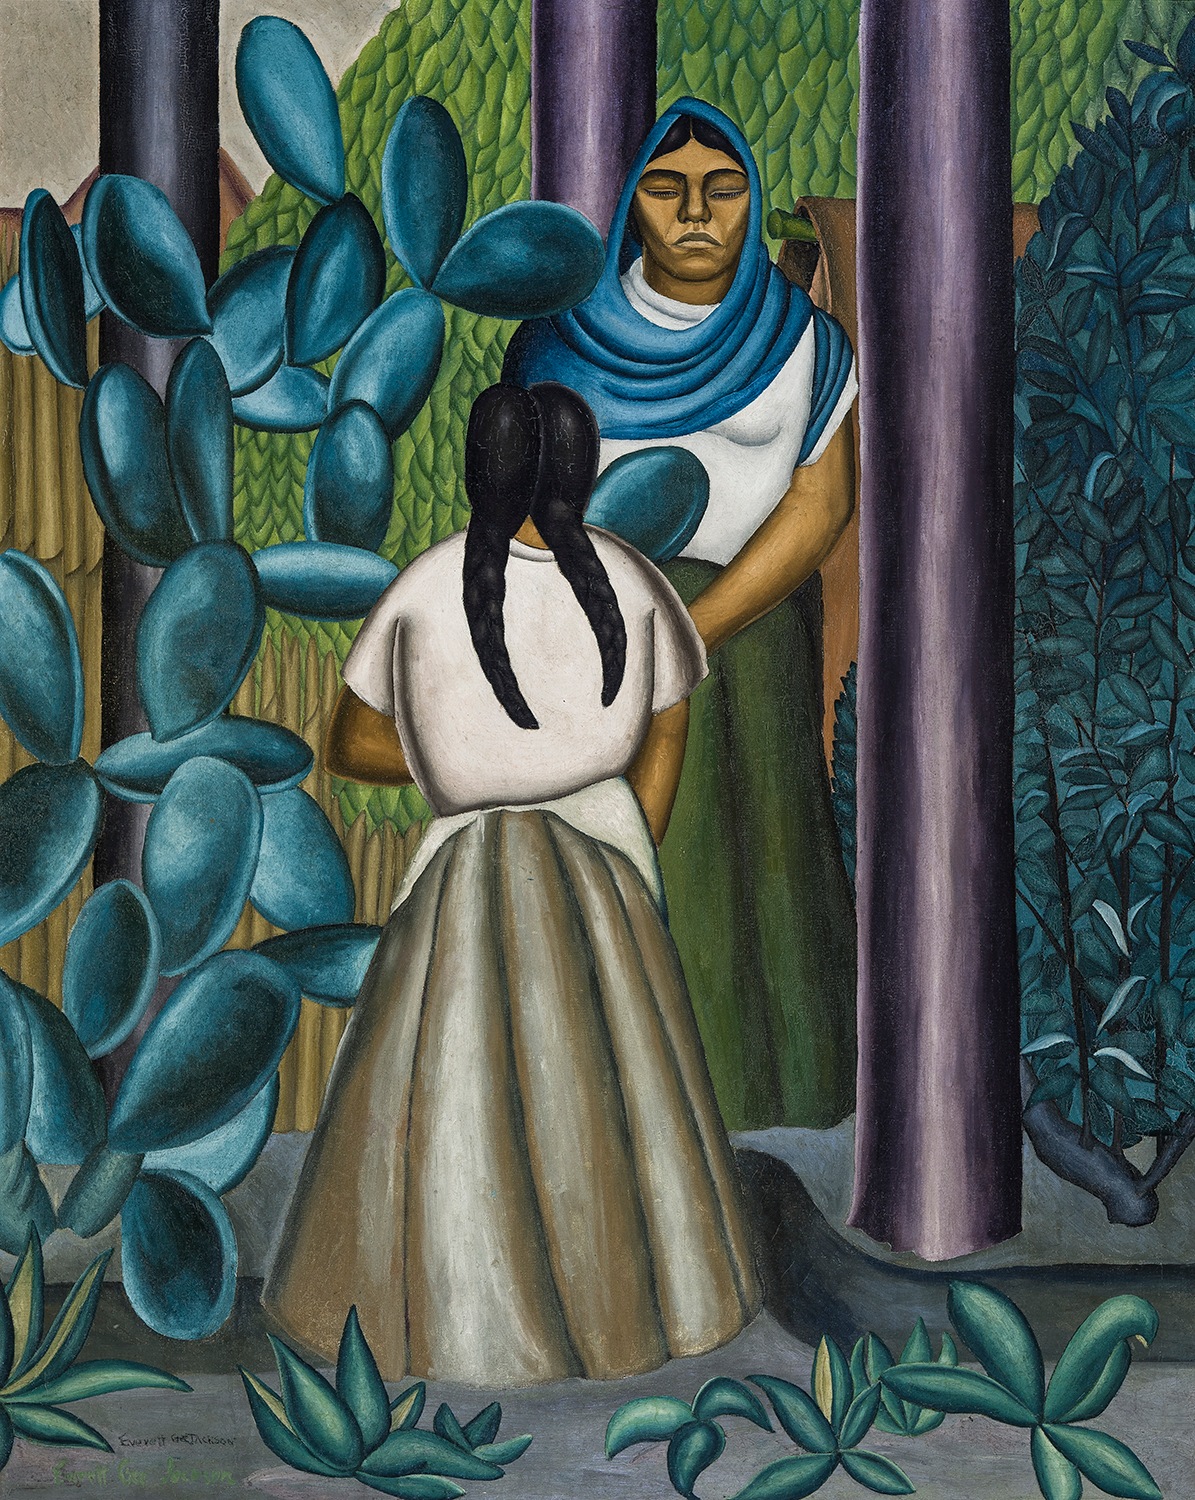 Women with Cactus, c. 1928, Oil on canvas, 45 x 36 in.